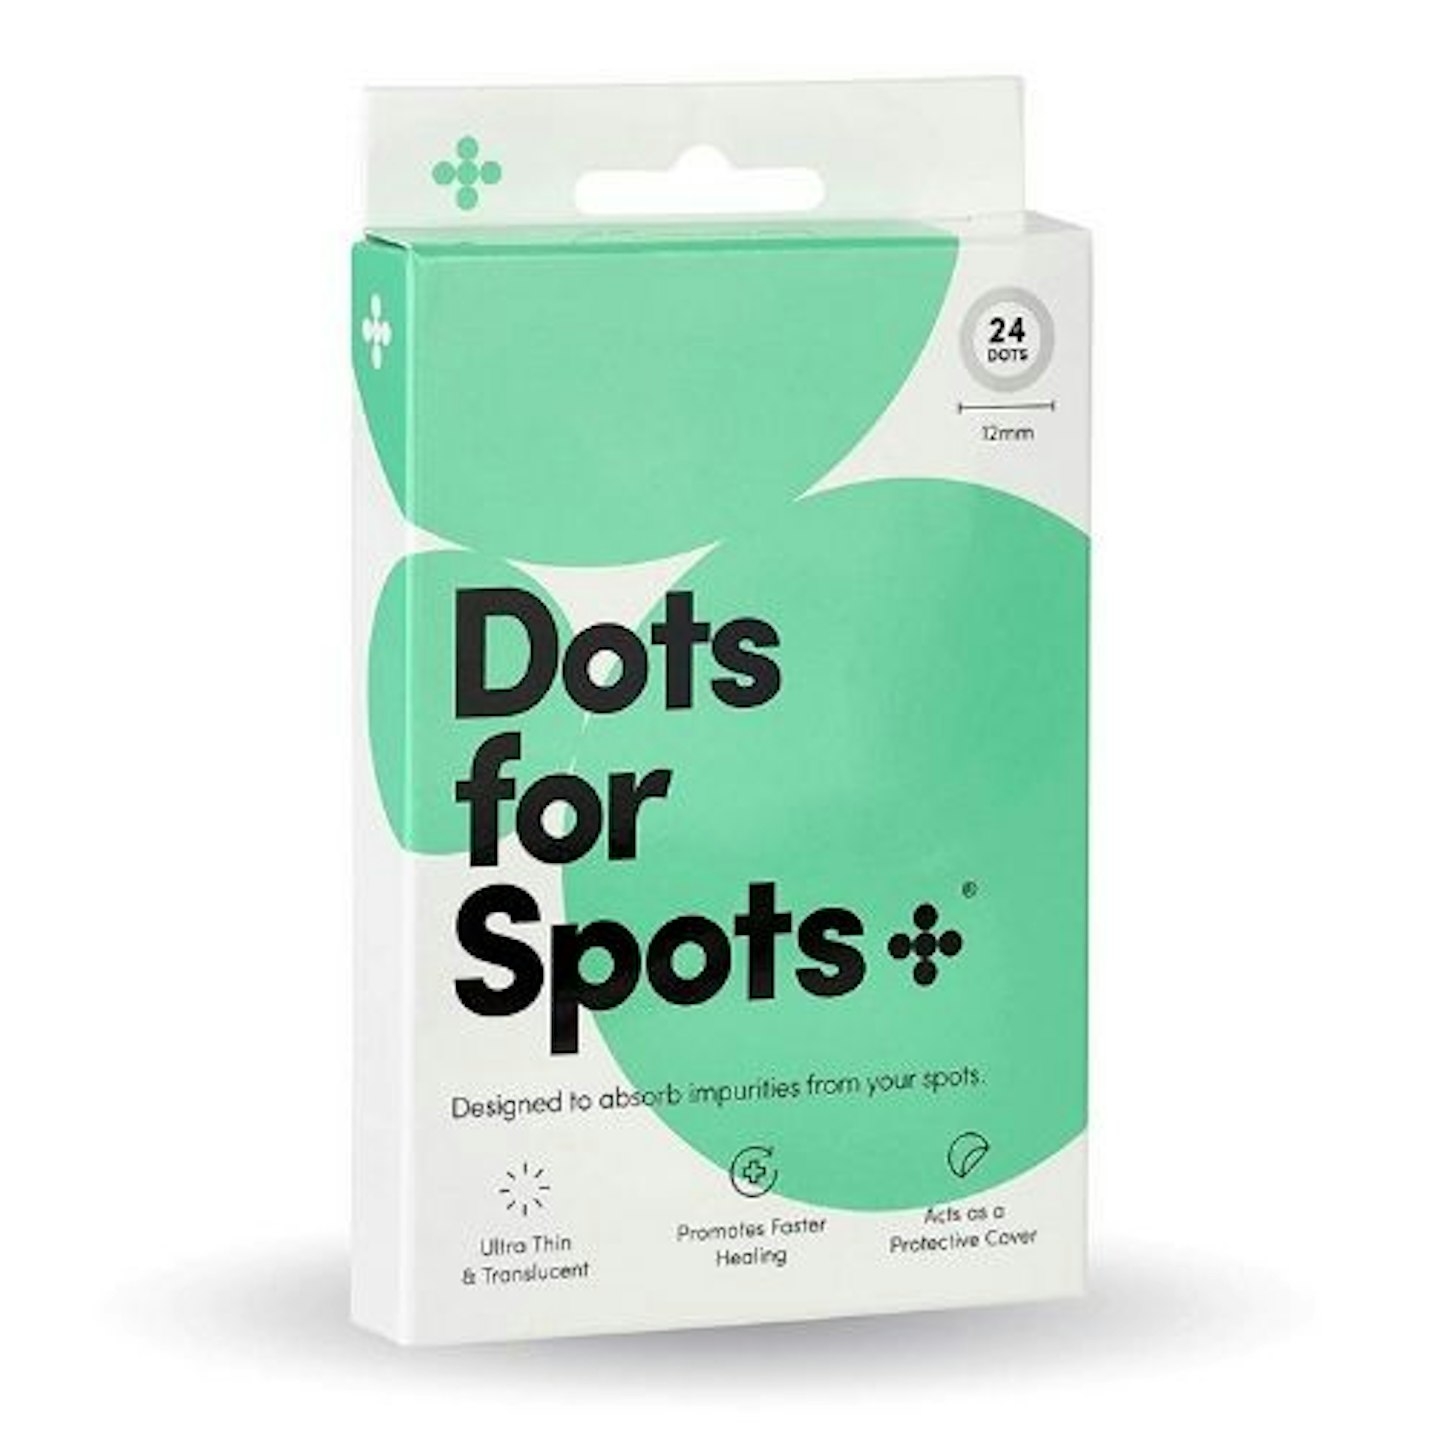 Dots for Spots Original Acne Absorbing Patches